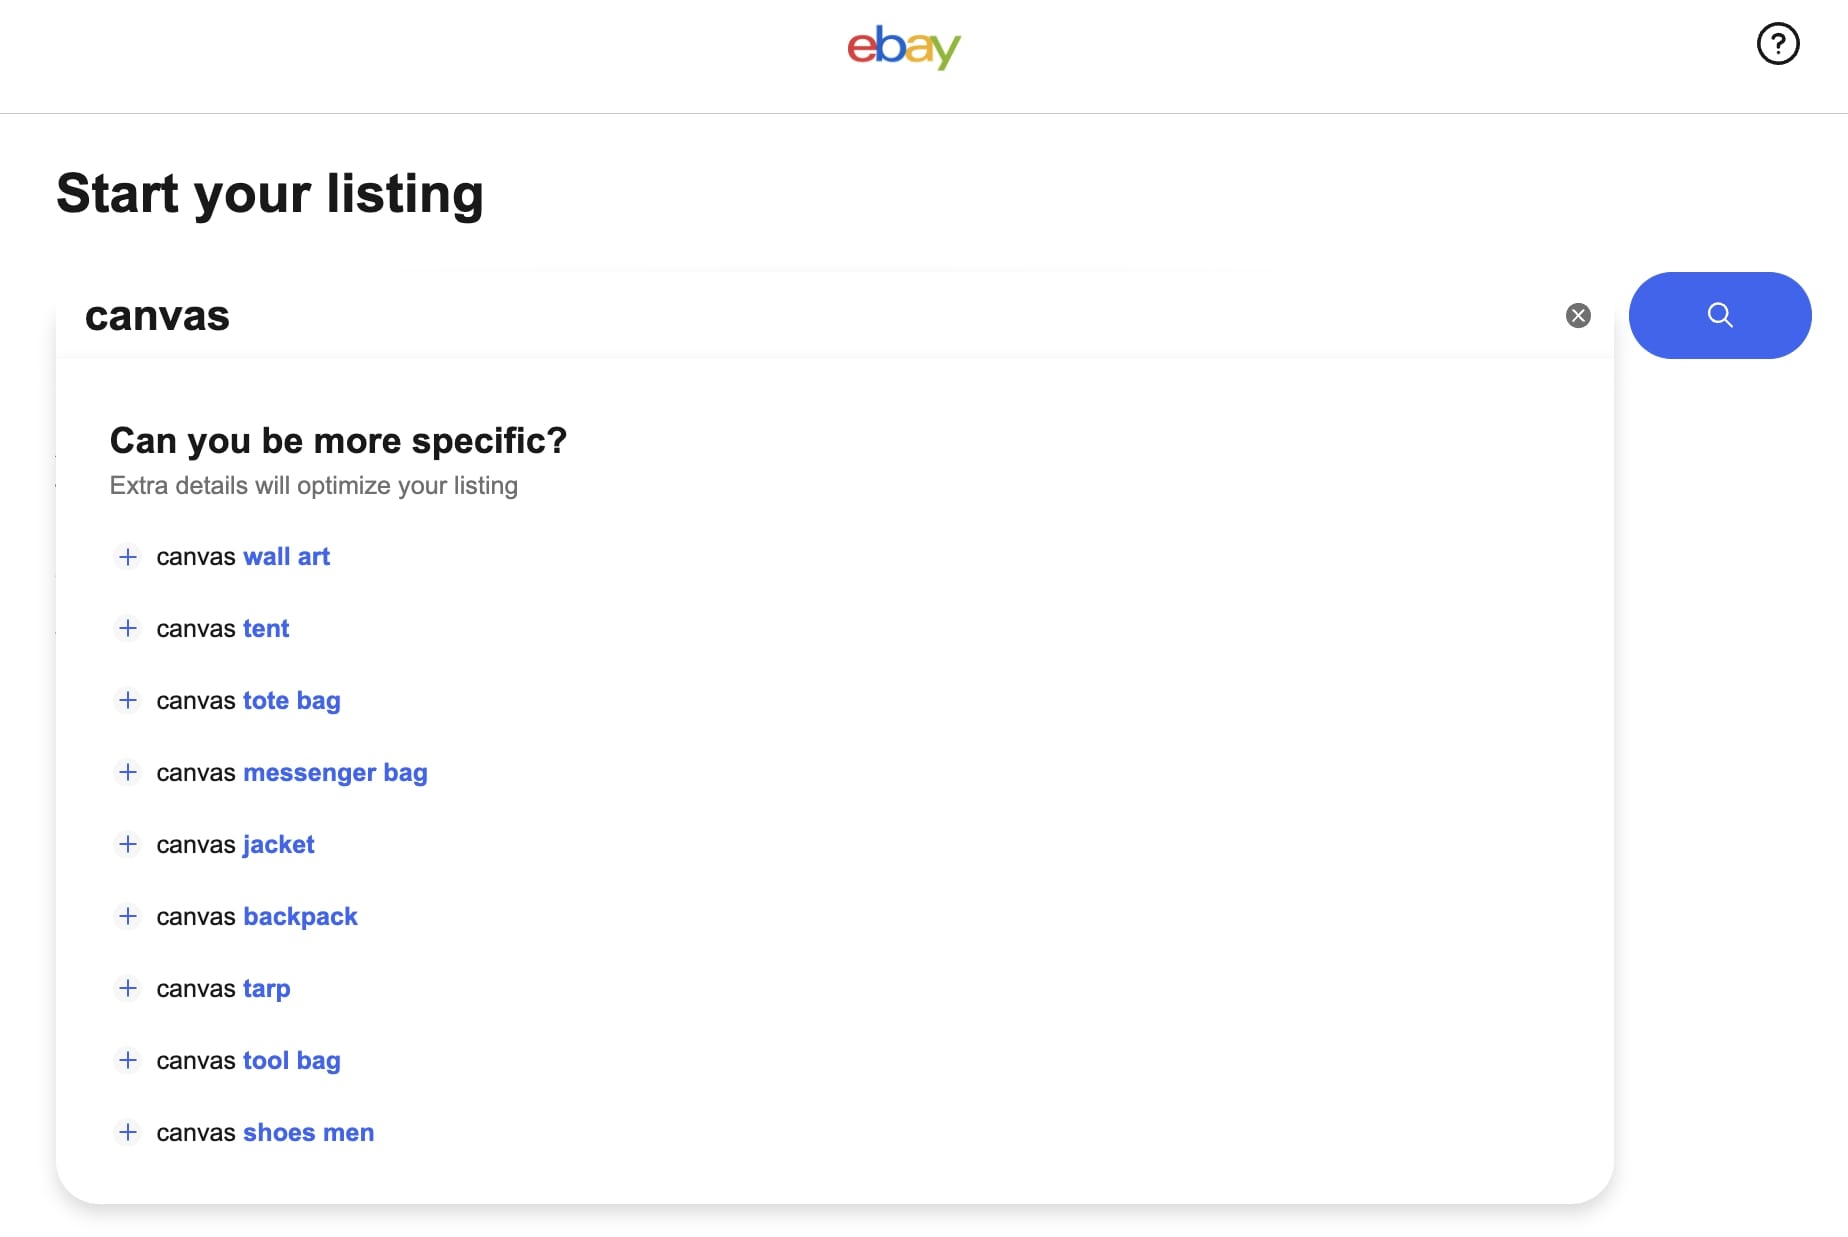 eBay's "Start your listing" page, which the "canvas" word written in the search field, followed by suggestions from the engine like "canvas wall art" and "canvas tool bag."